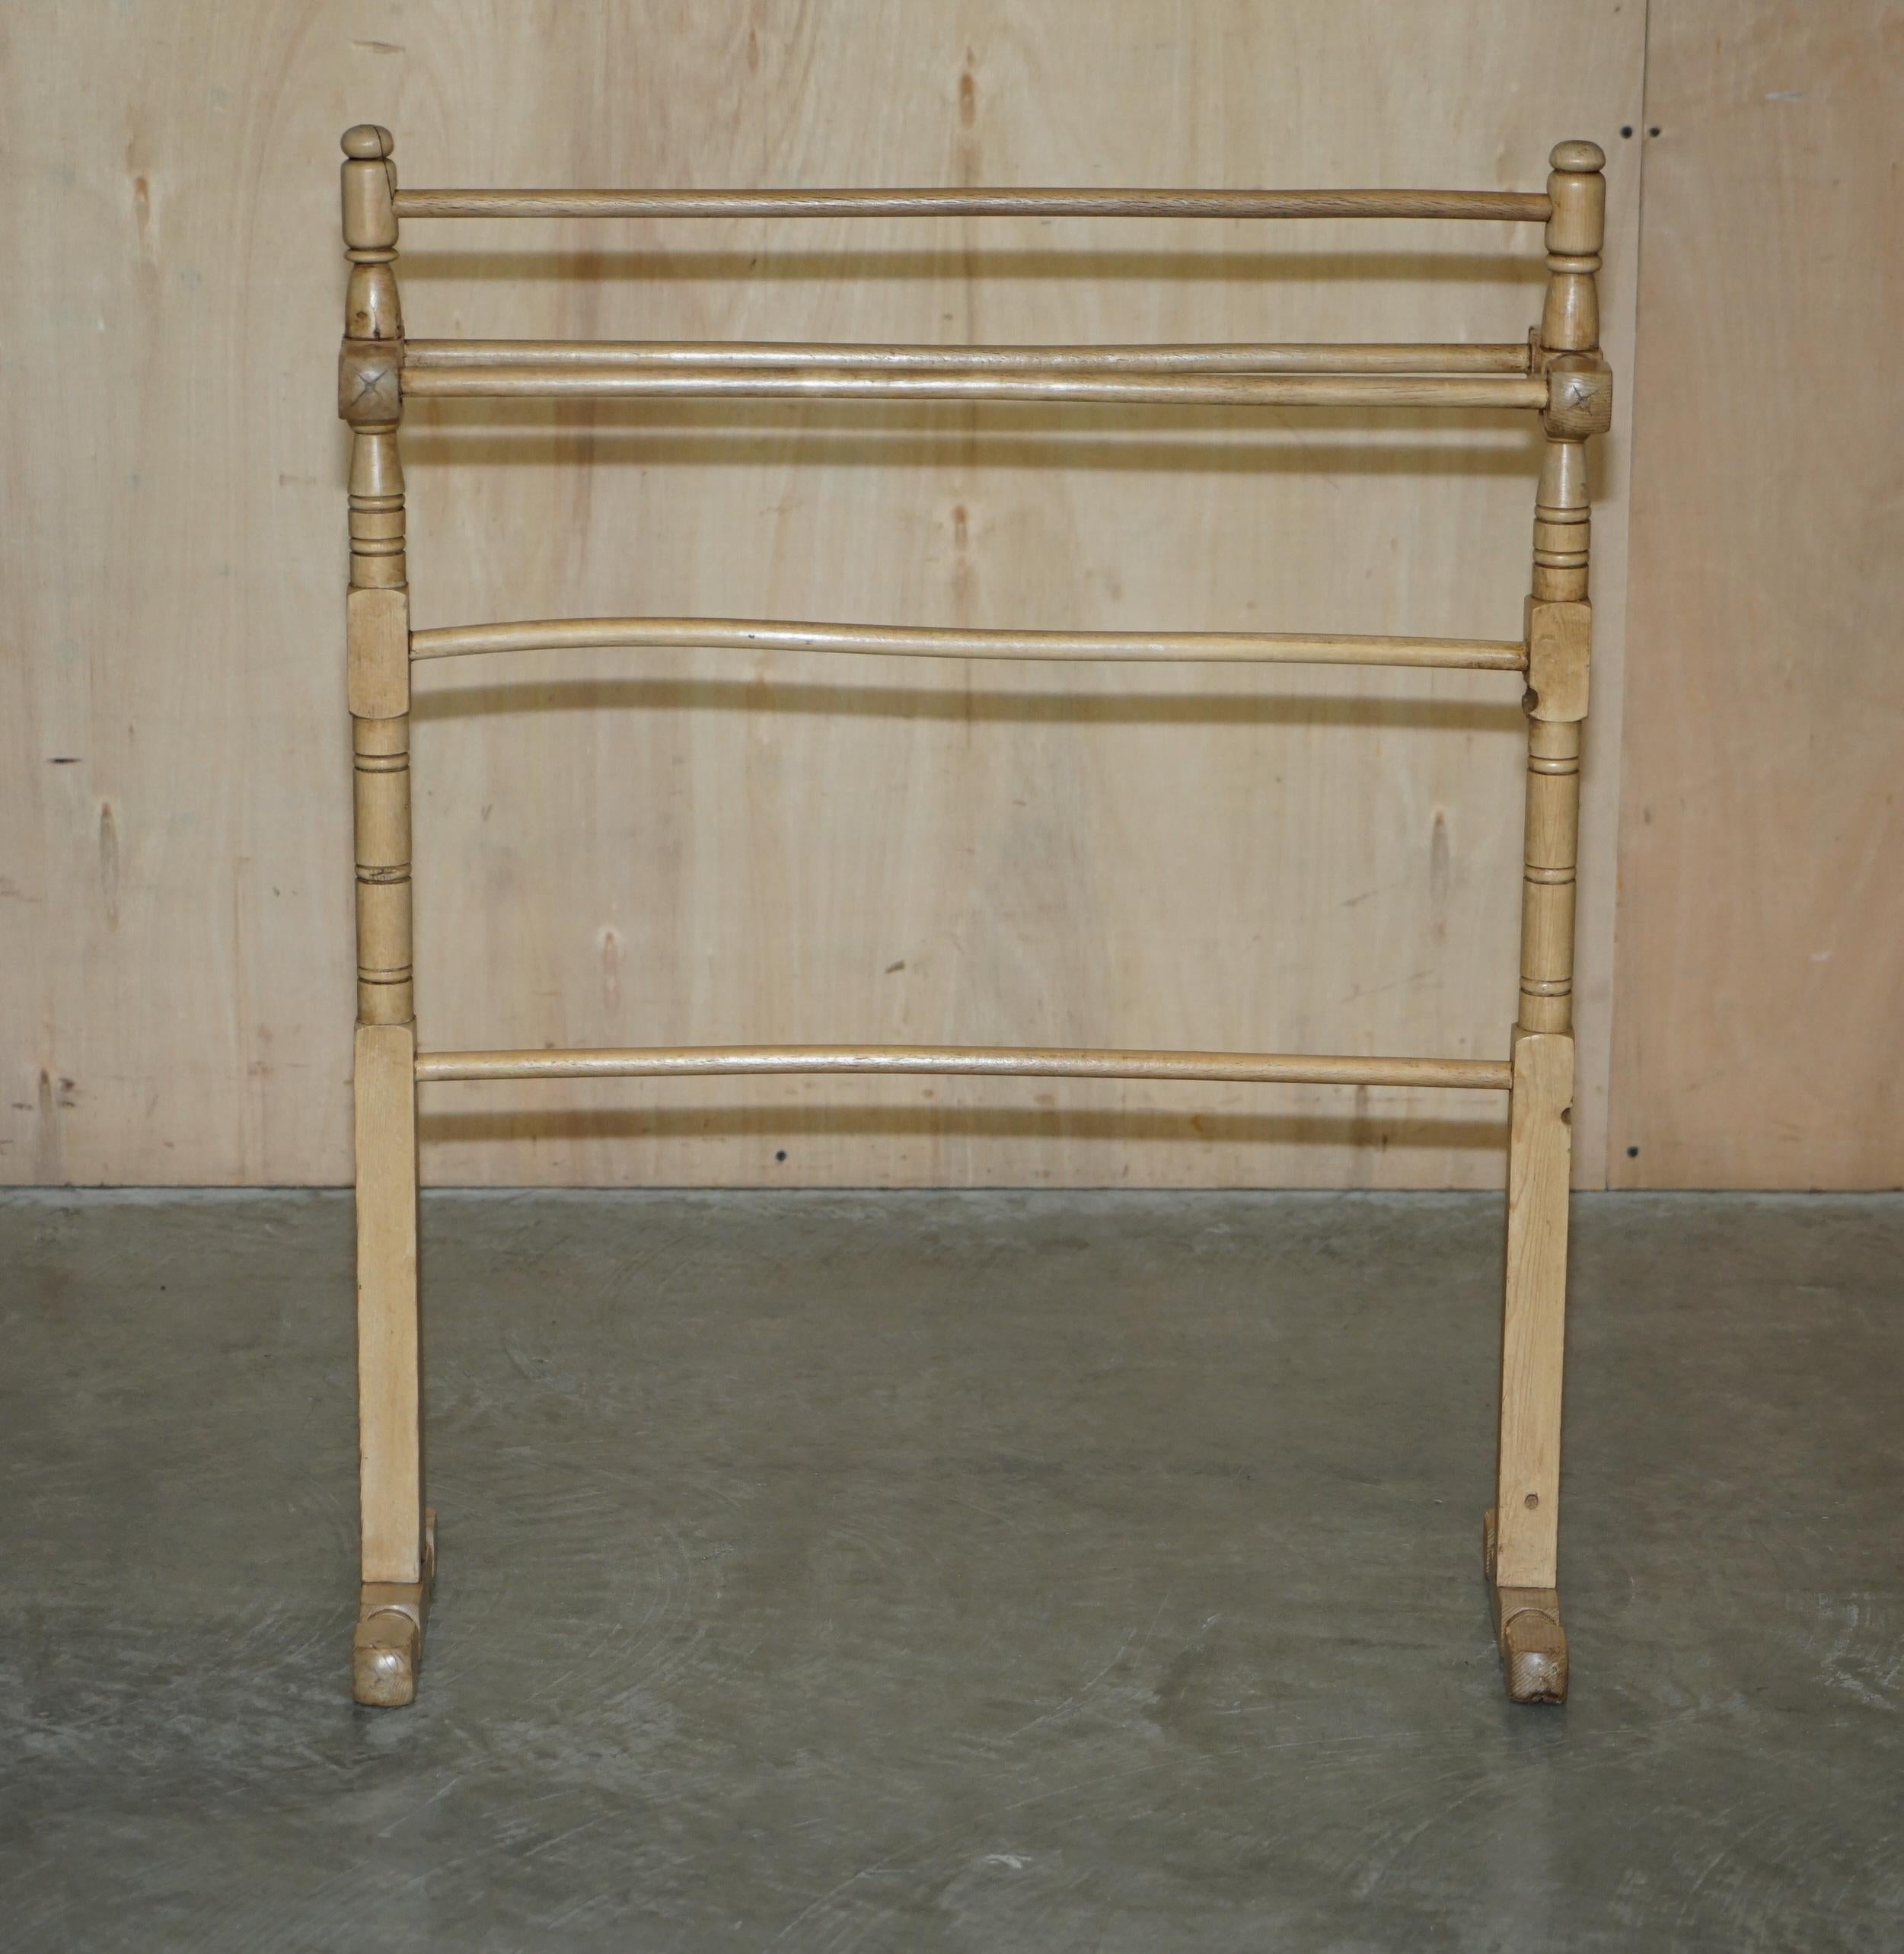 We are delighted to offer for sale this stunning antique circa 1880s solid pine bathroom towel rail with a nicely antiqued finish.

A good looking well made and decorative towel rail, its nicely turned and looks very much the